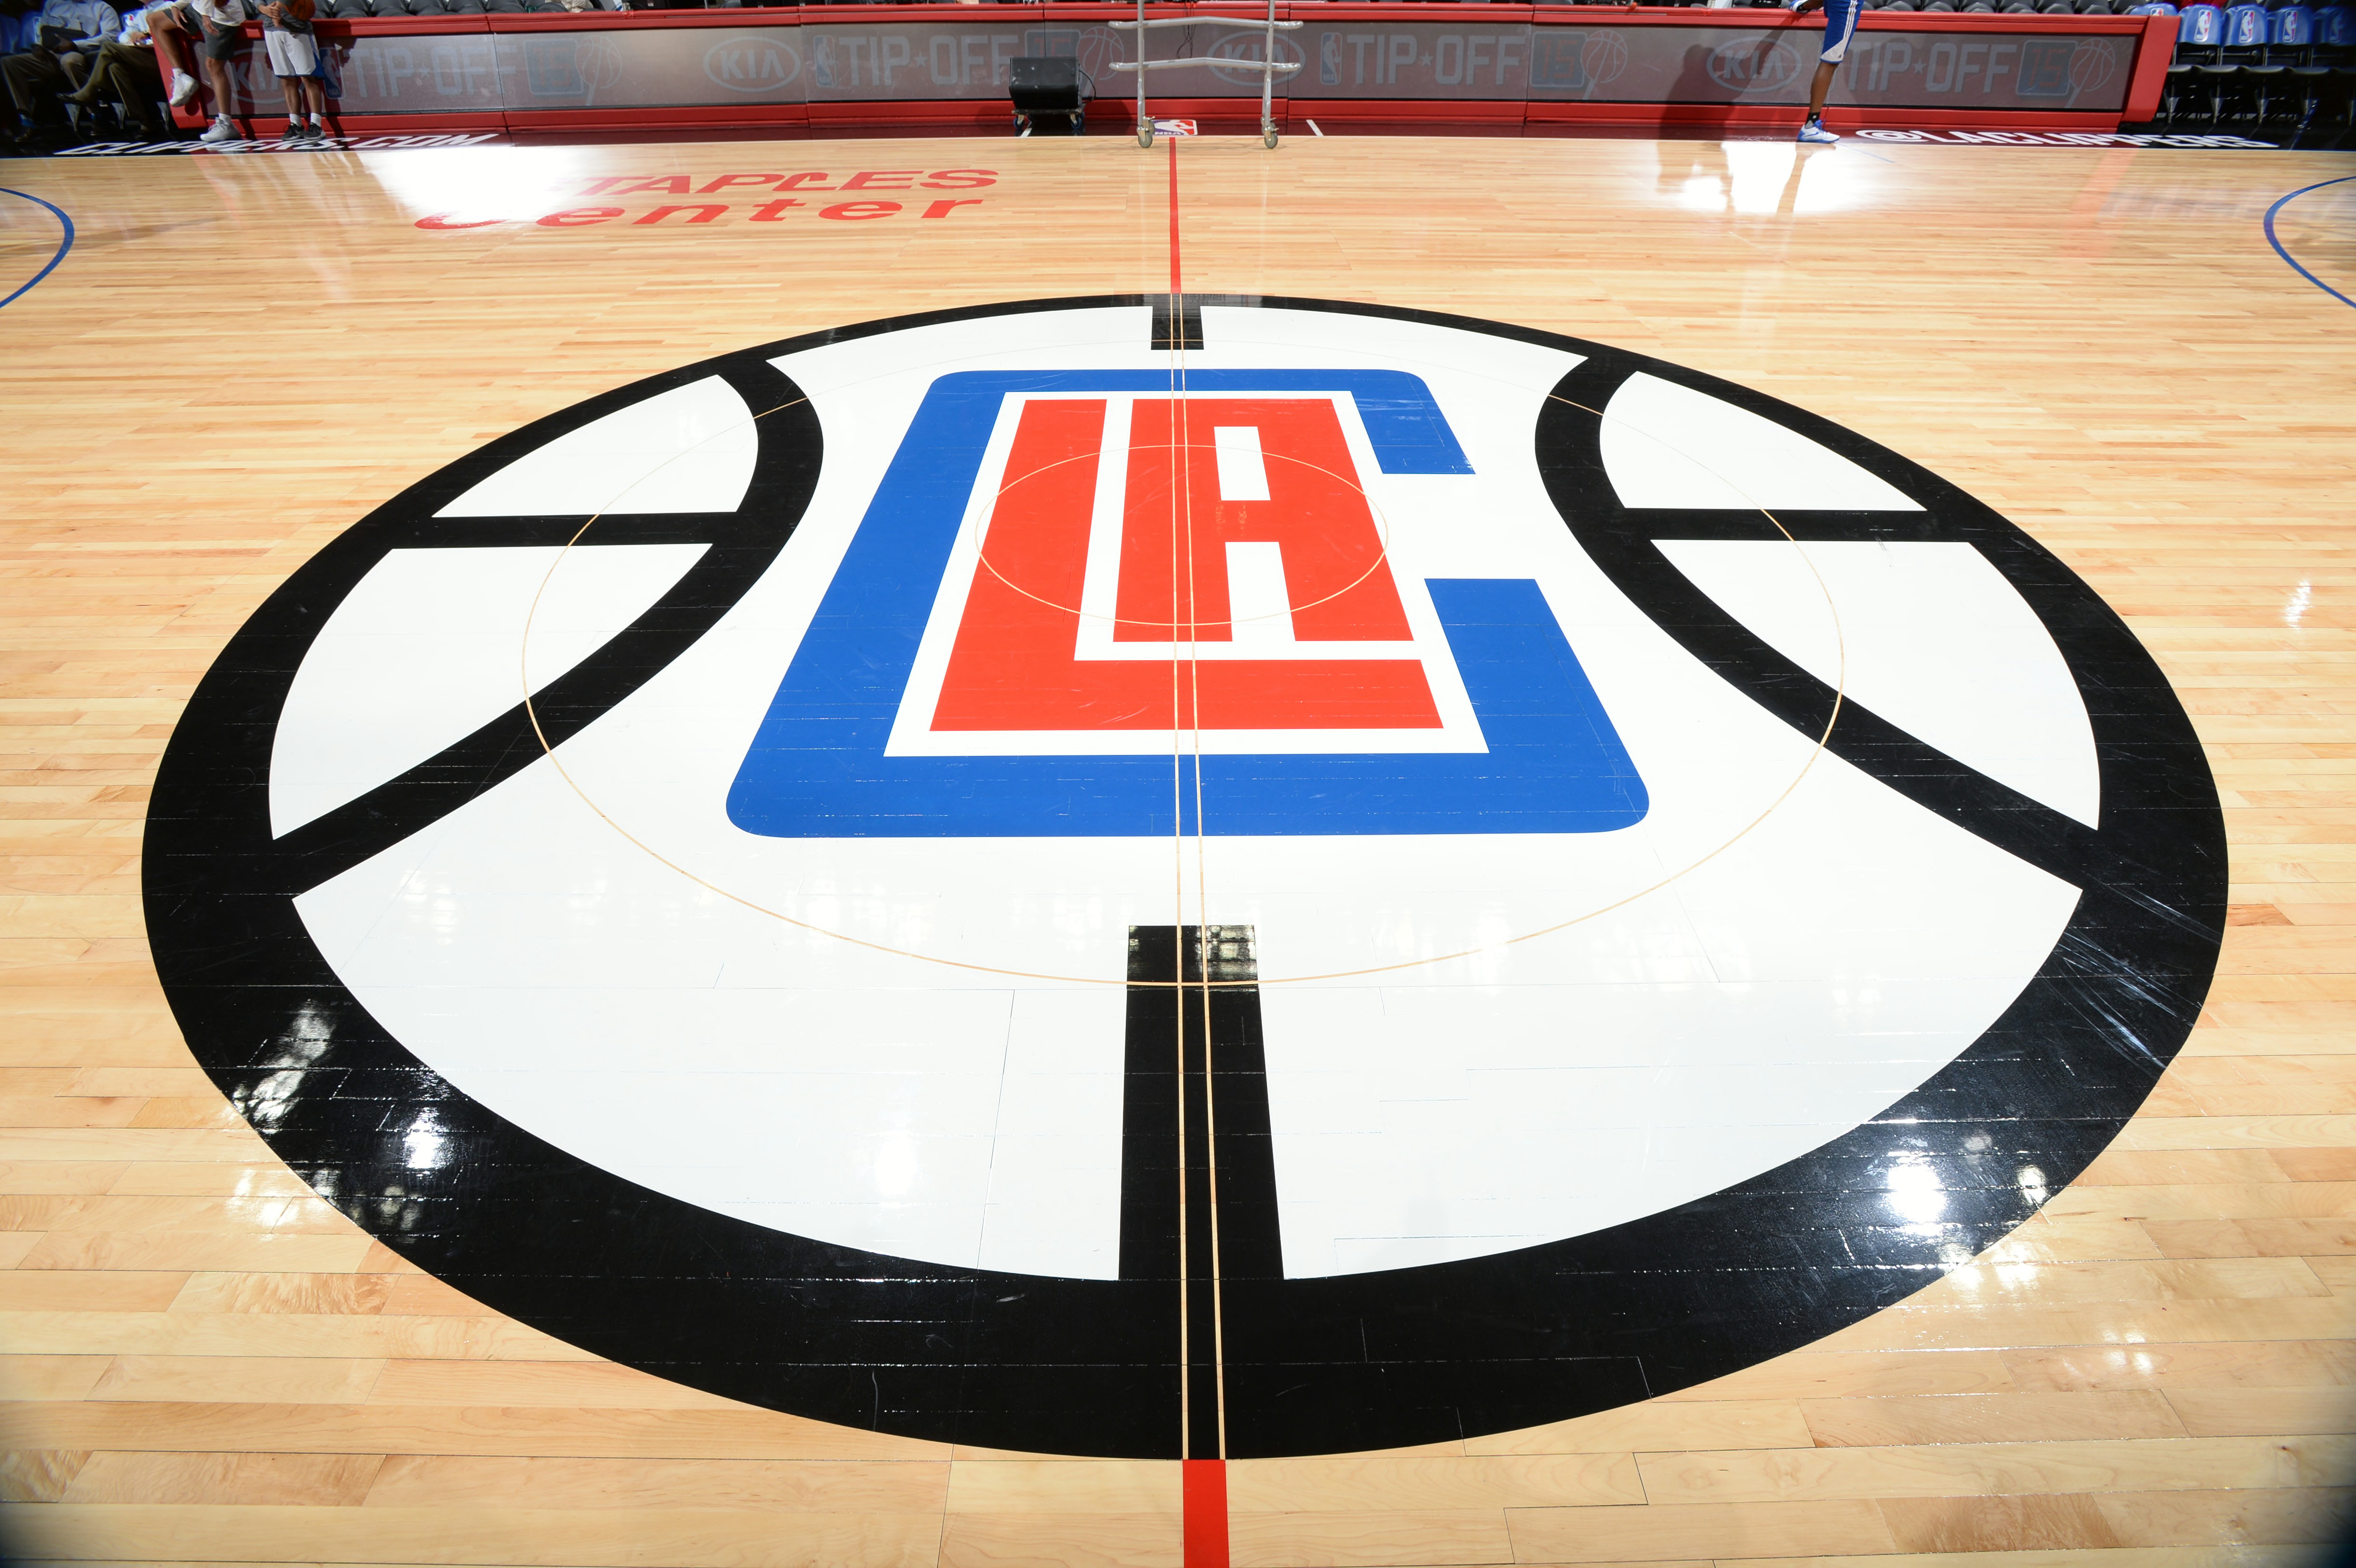 LA Clippers Before Lob City - Los Angeles Sports Nation